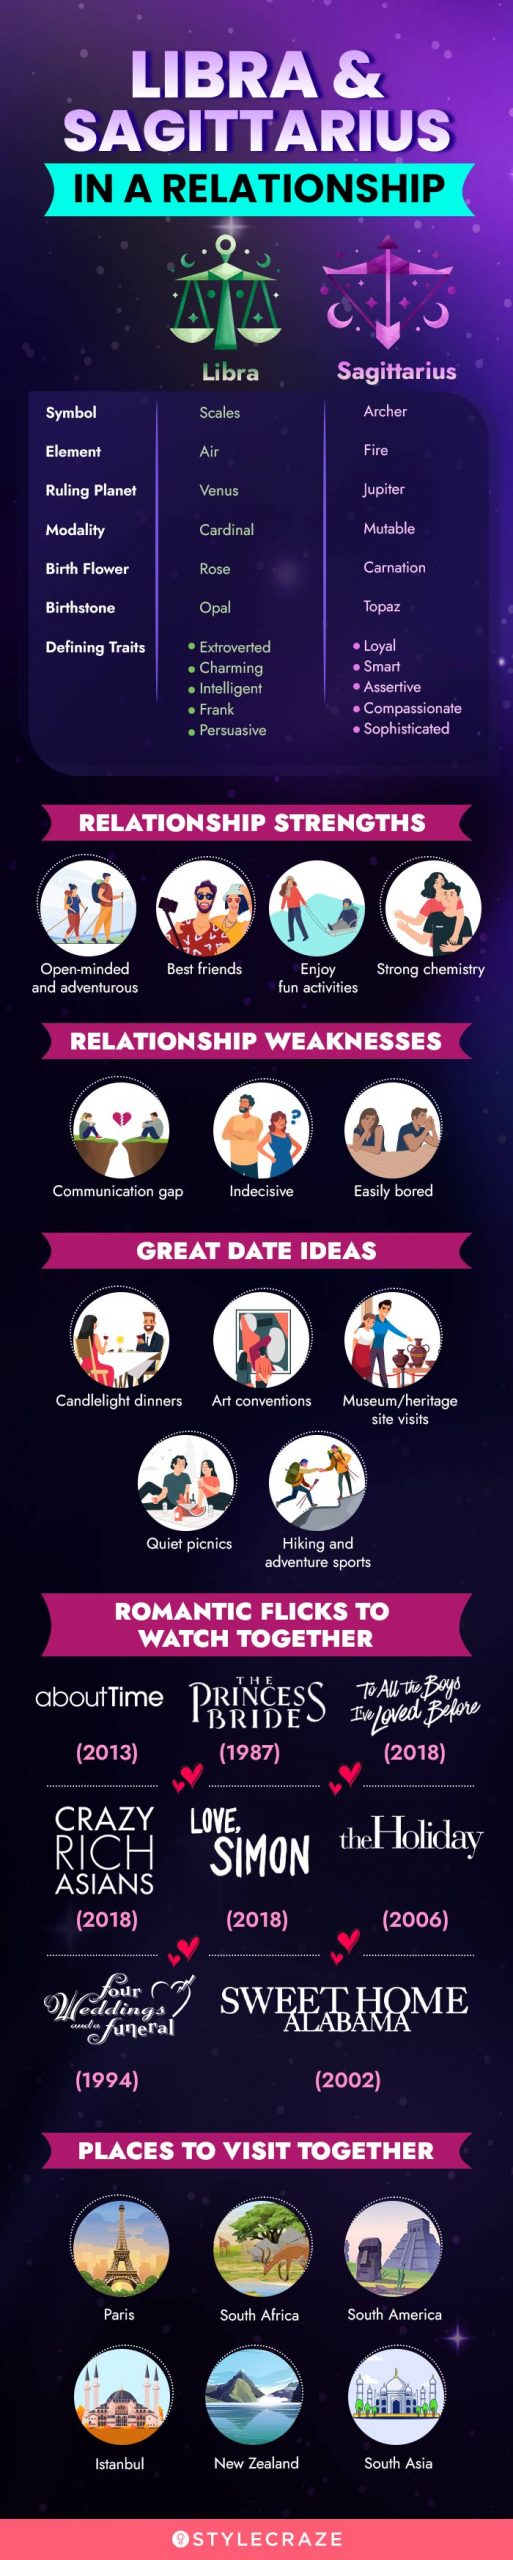 libra and sagittarius in a relationship (infographic)